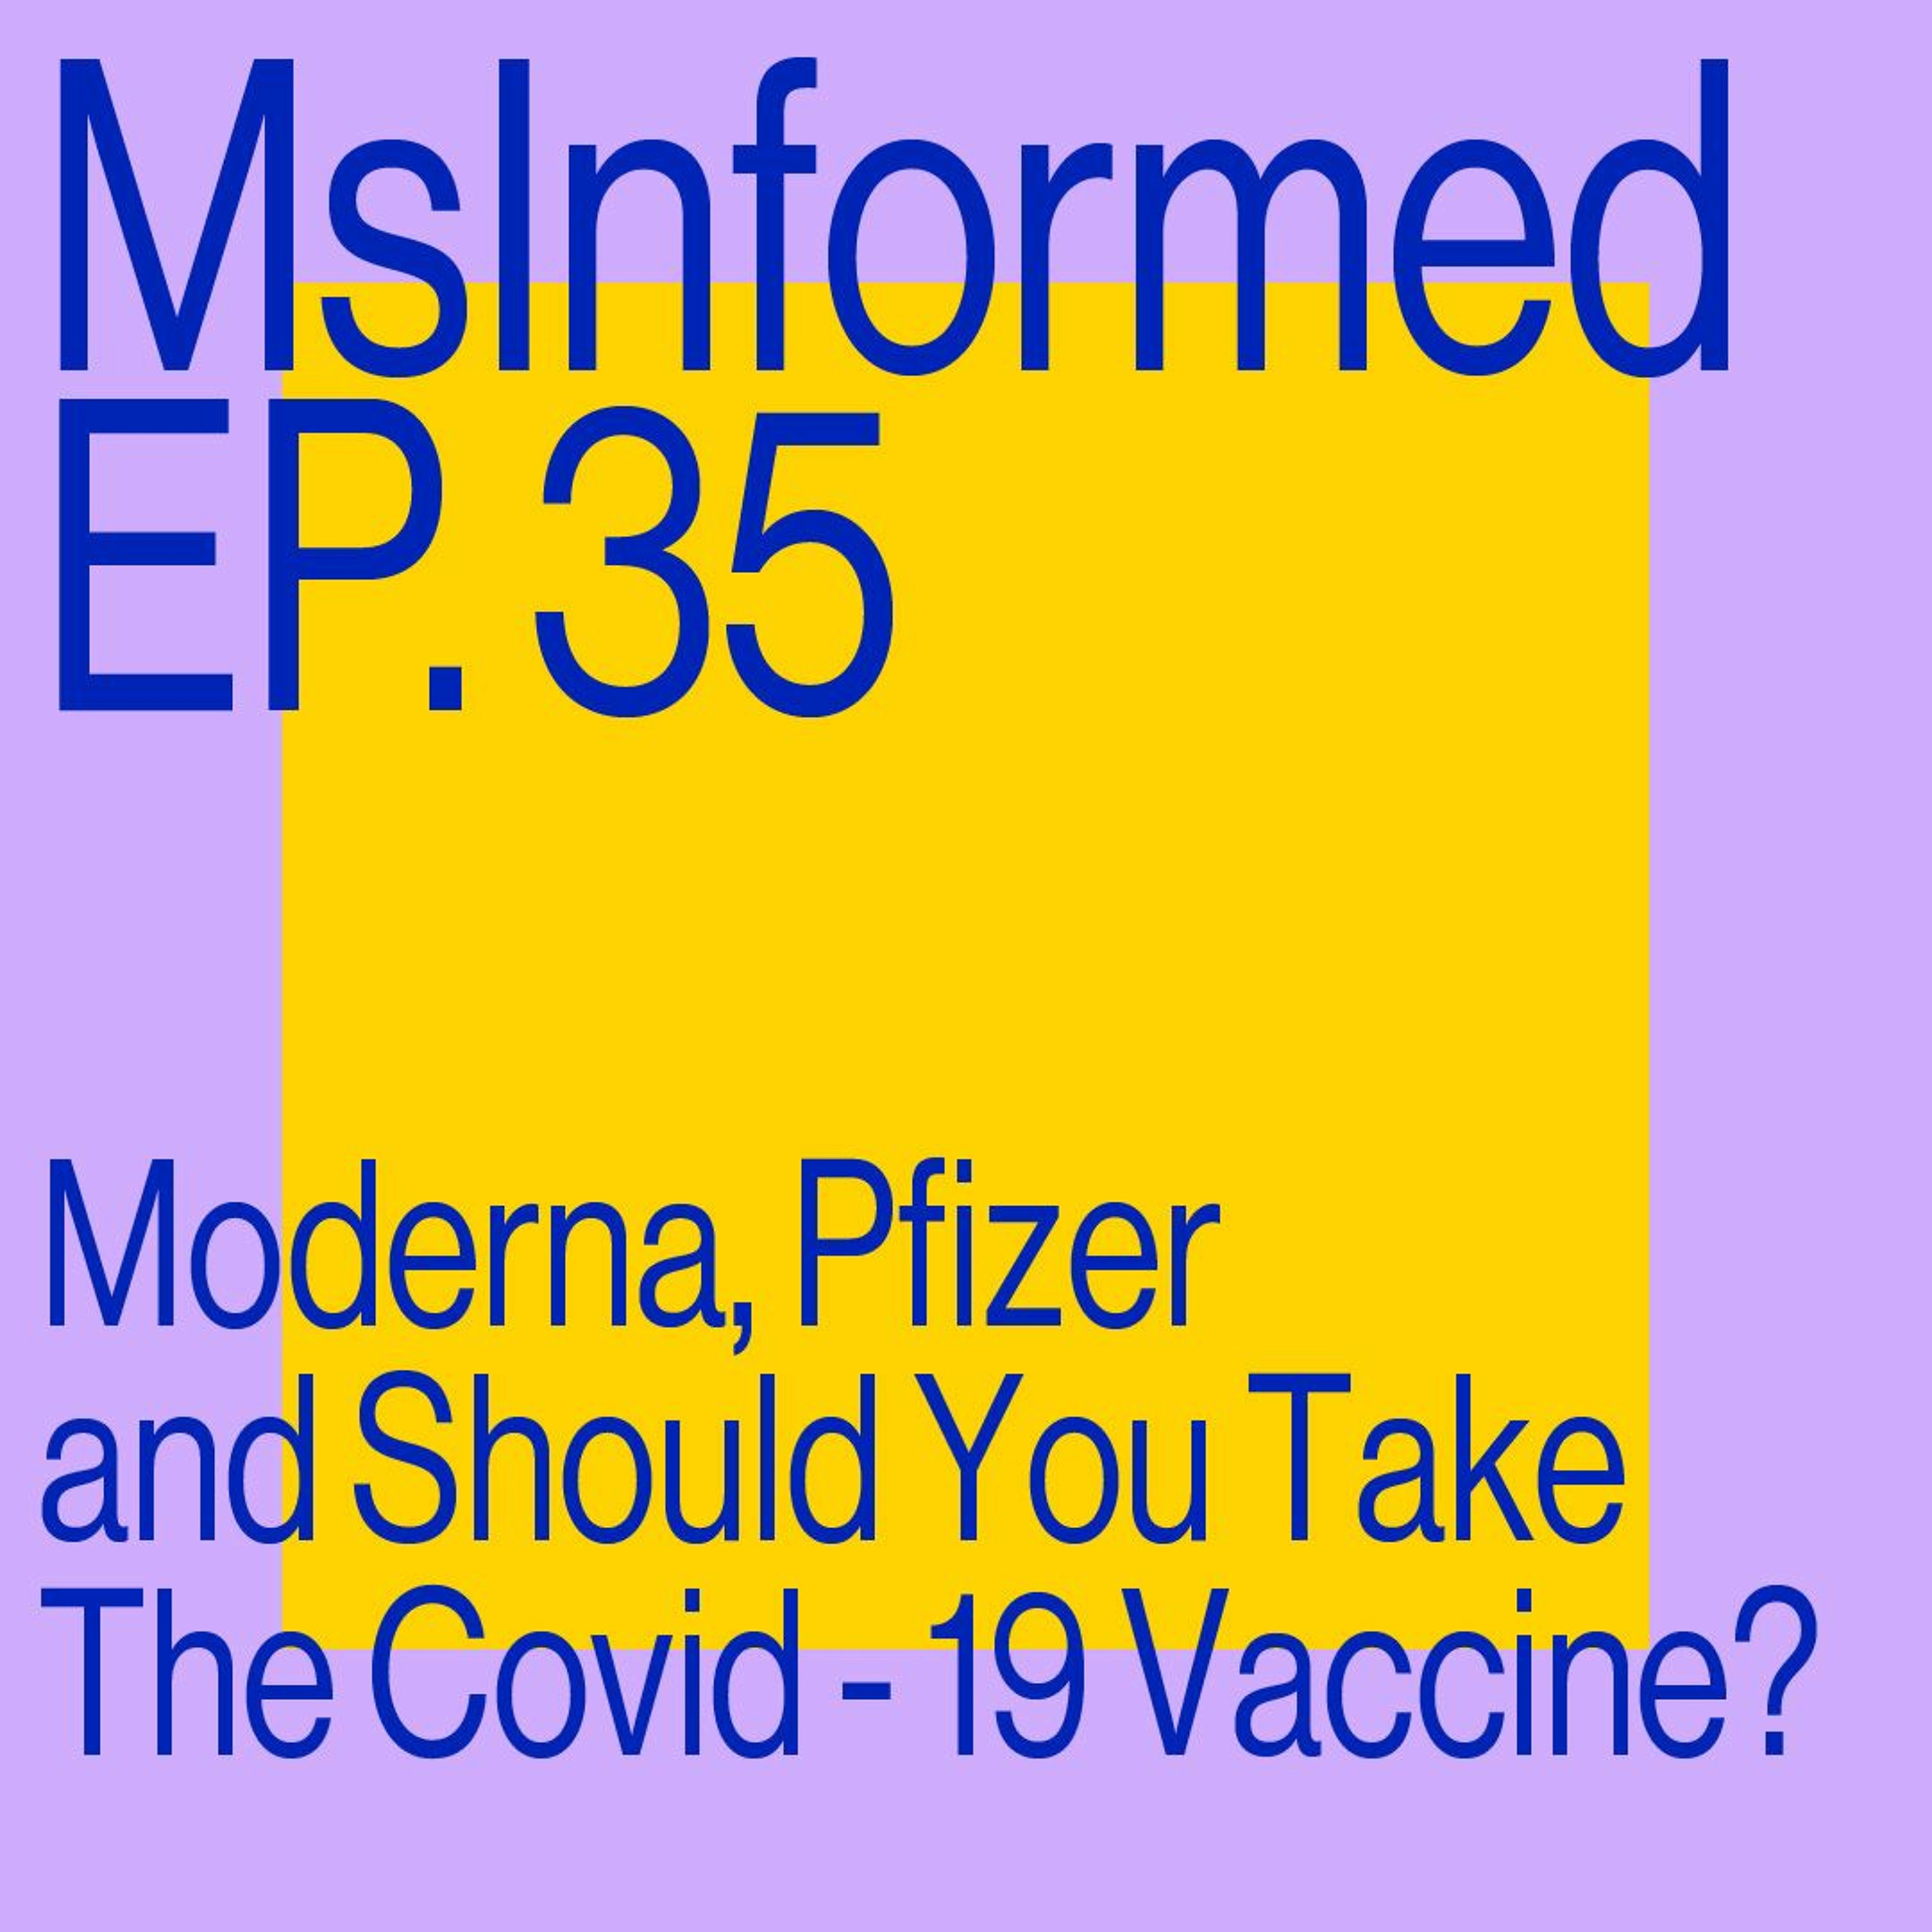 Episode 35: Moderna, Pfizer And Should You Take The Covid - 19 Vaccine?